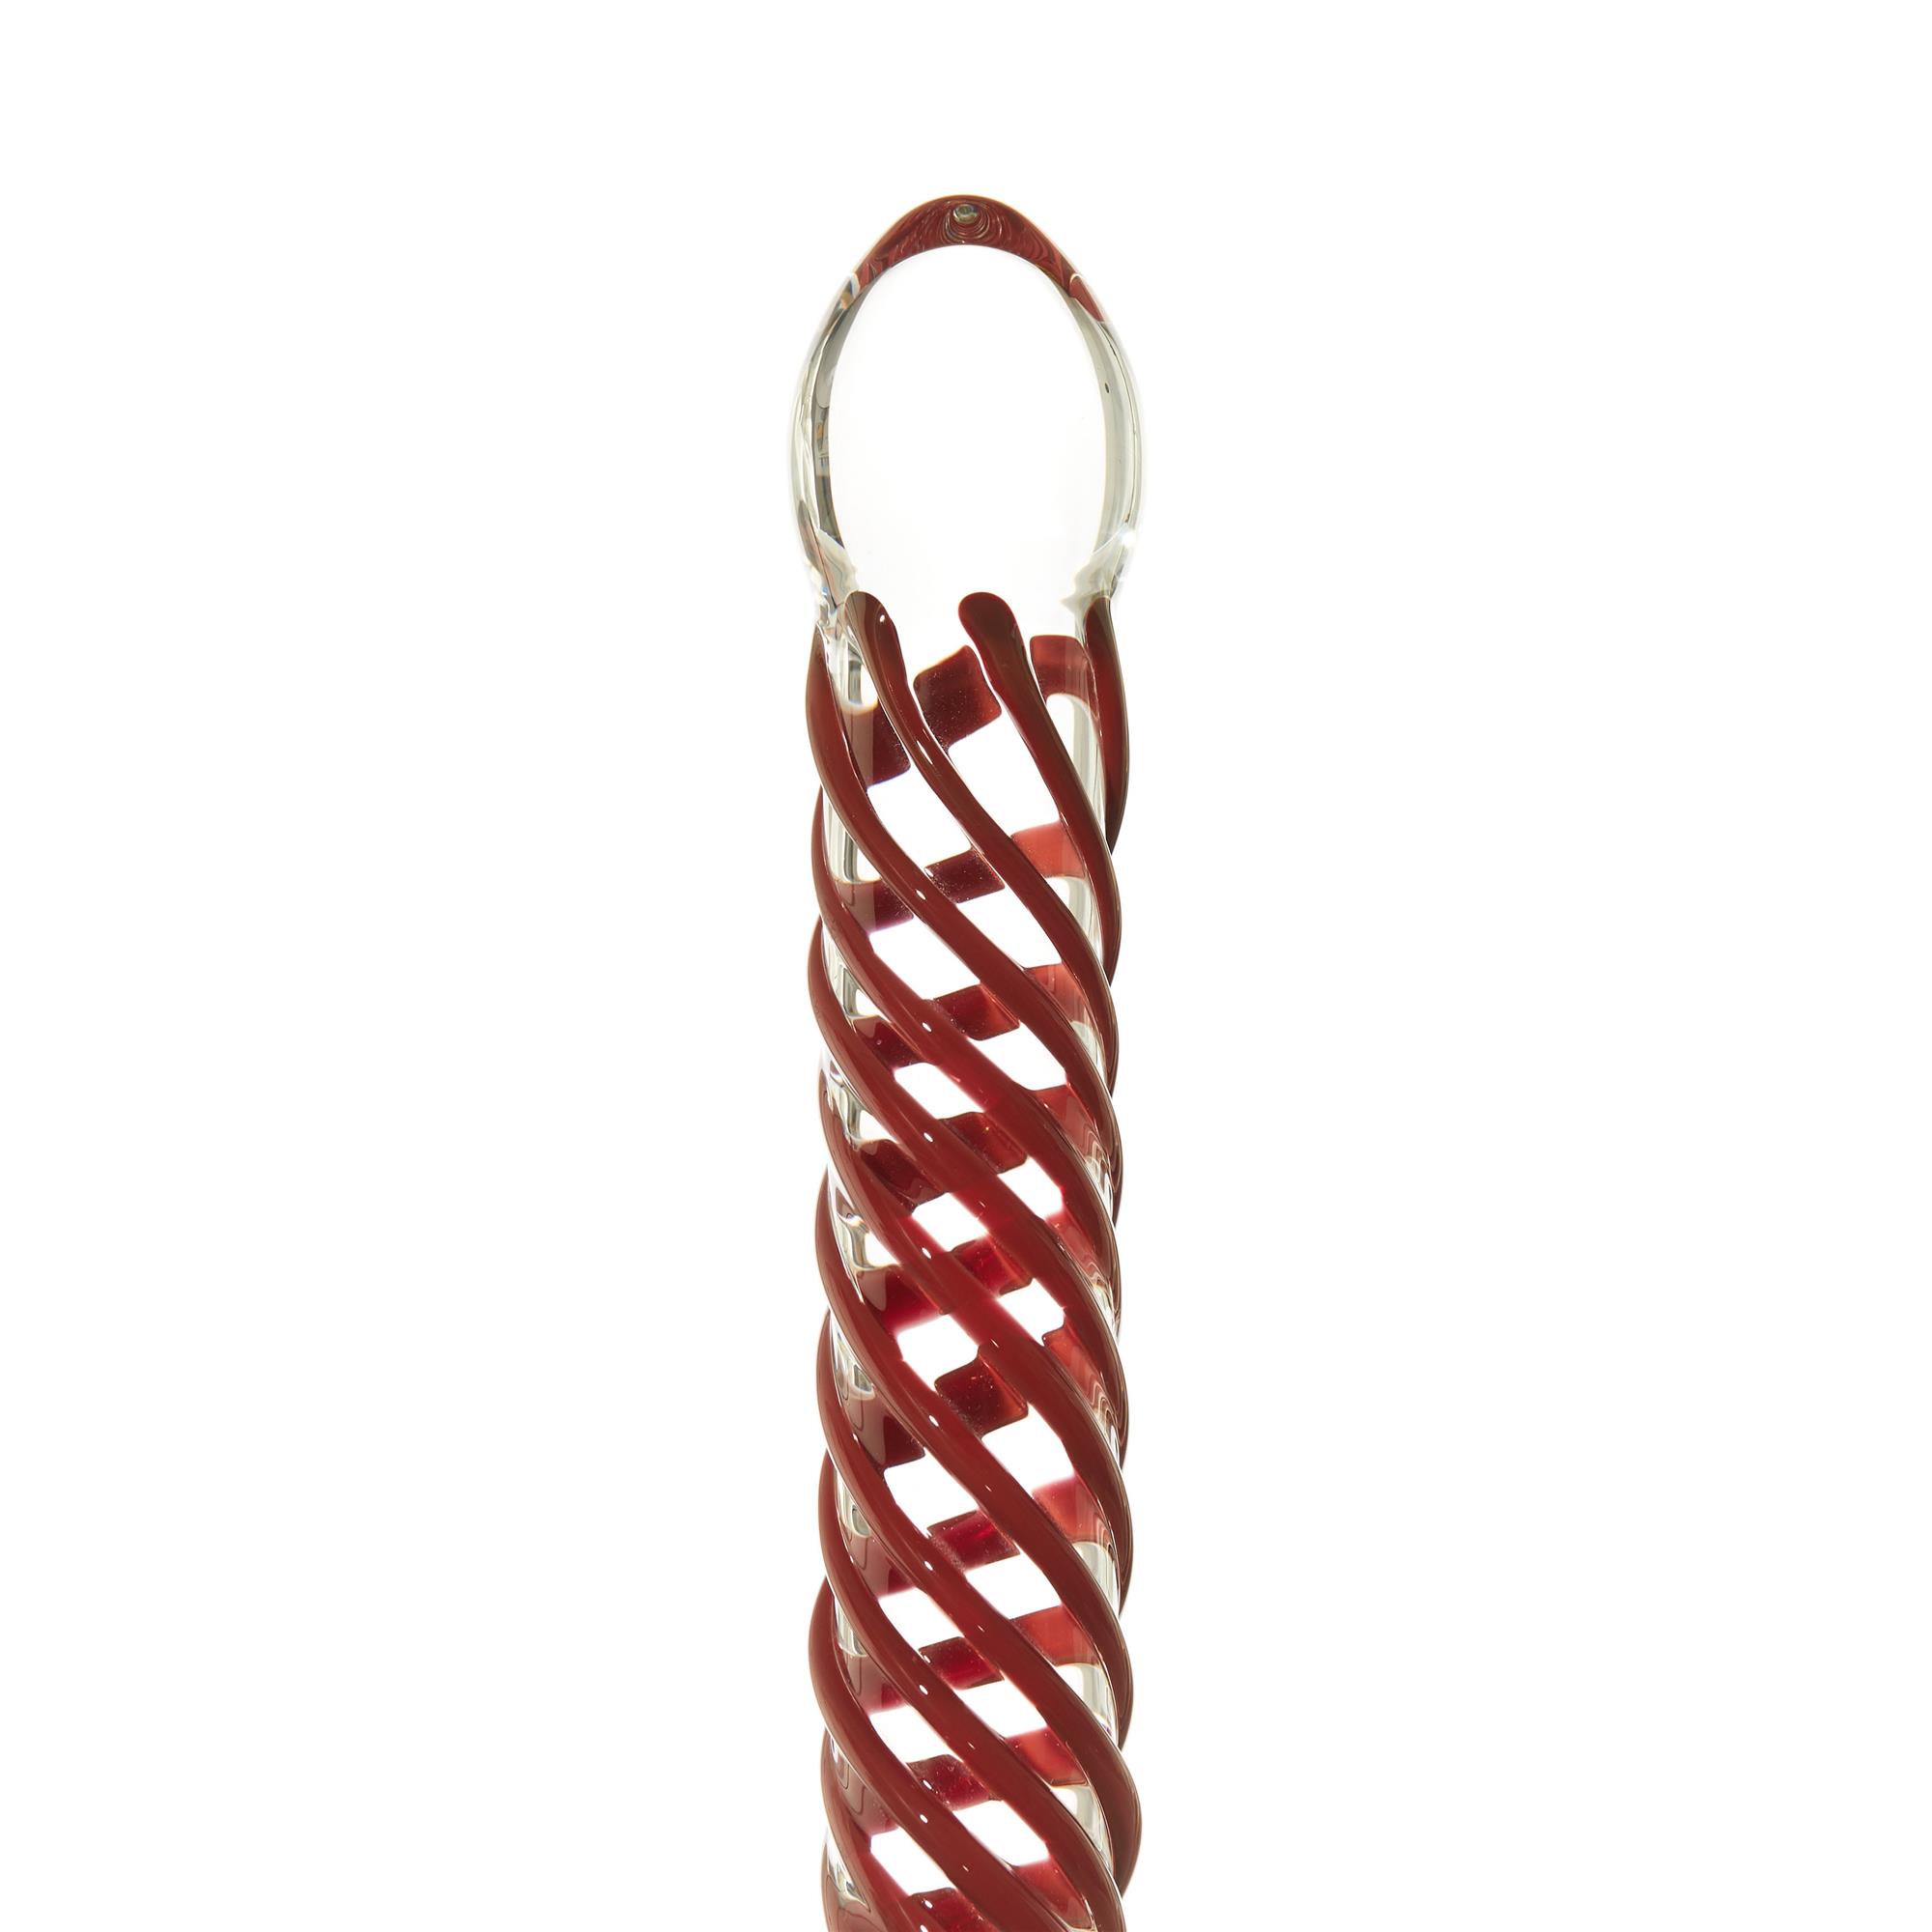 THE RED TWIST DOUBLE-SIDED DILDO